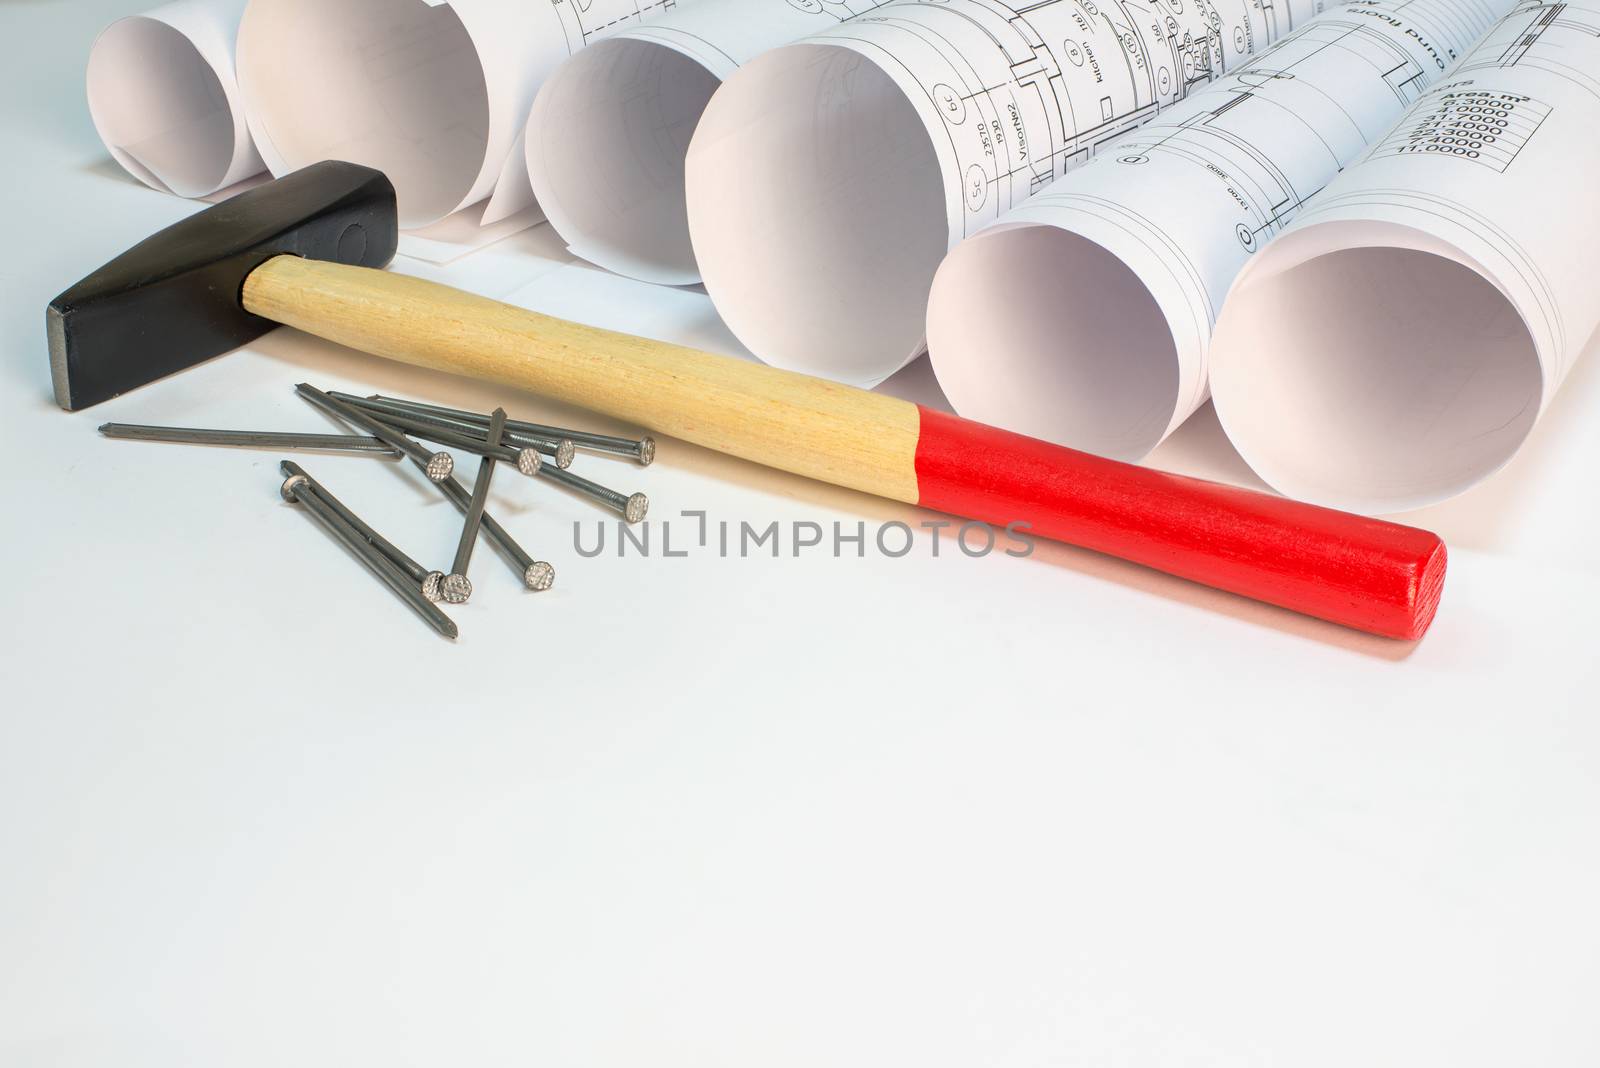 Drawing rolls, hammer and nails on white surface